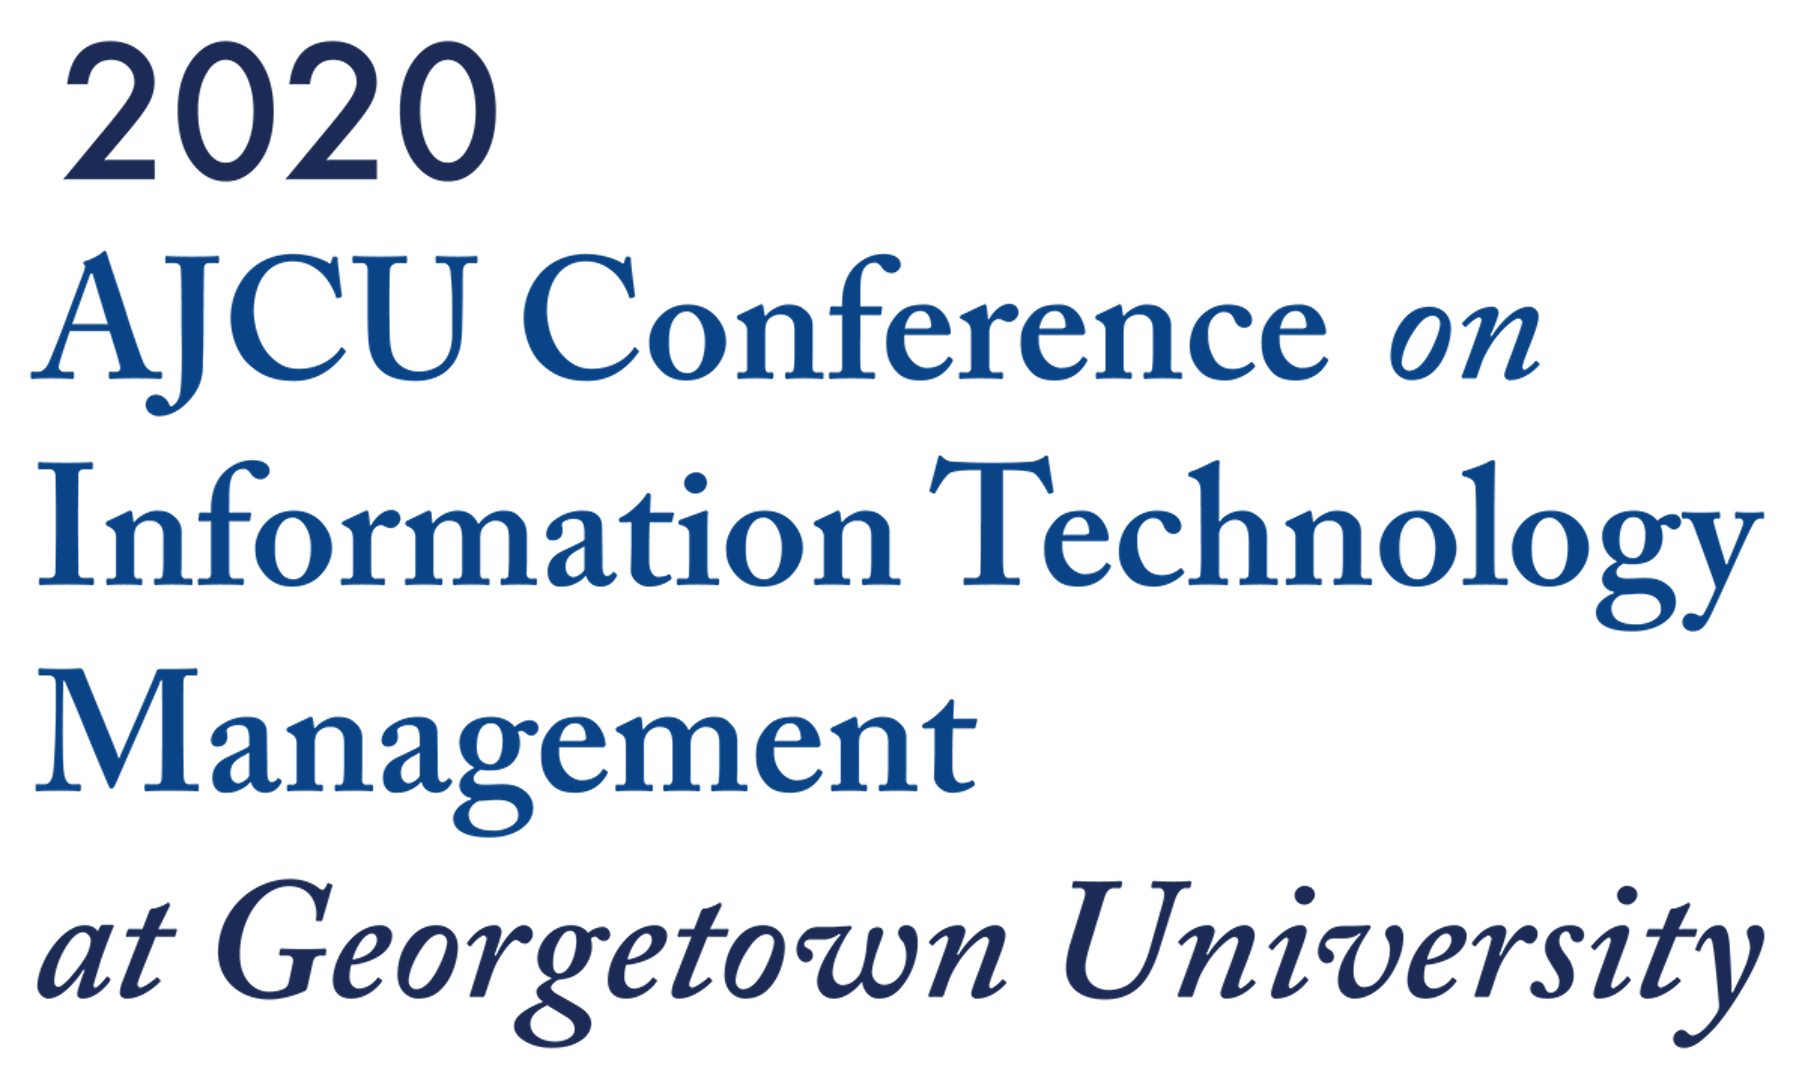 AJCU CITM 2020 Conference at Georgetown University